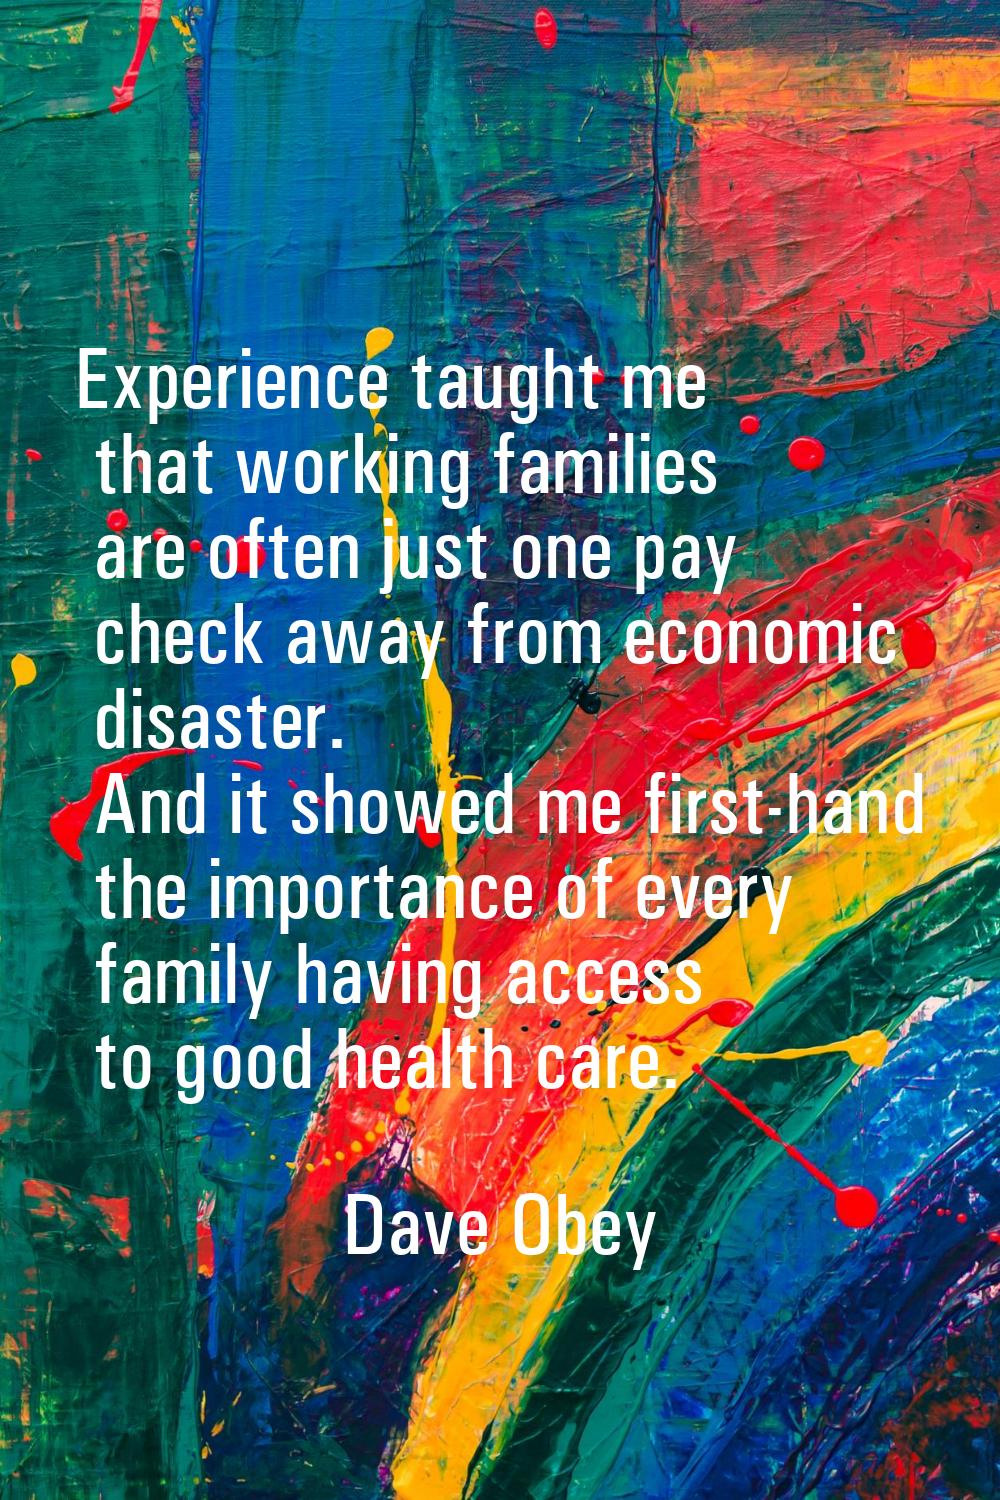 Experience taught me that working families are often just one pay check away from economic disaster